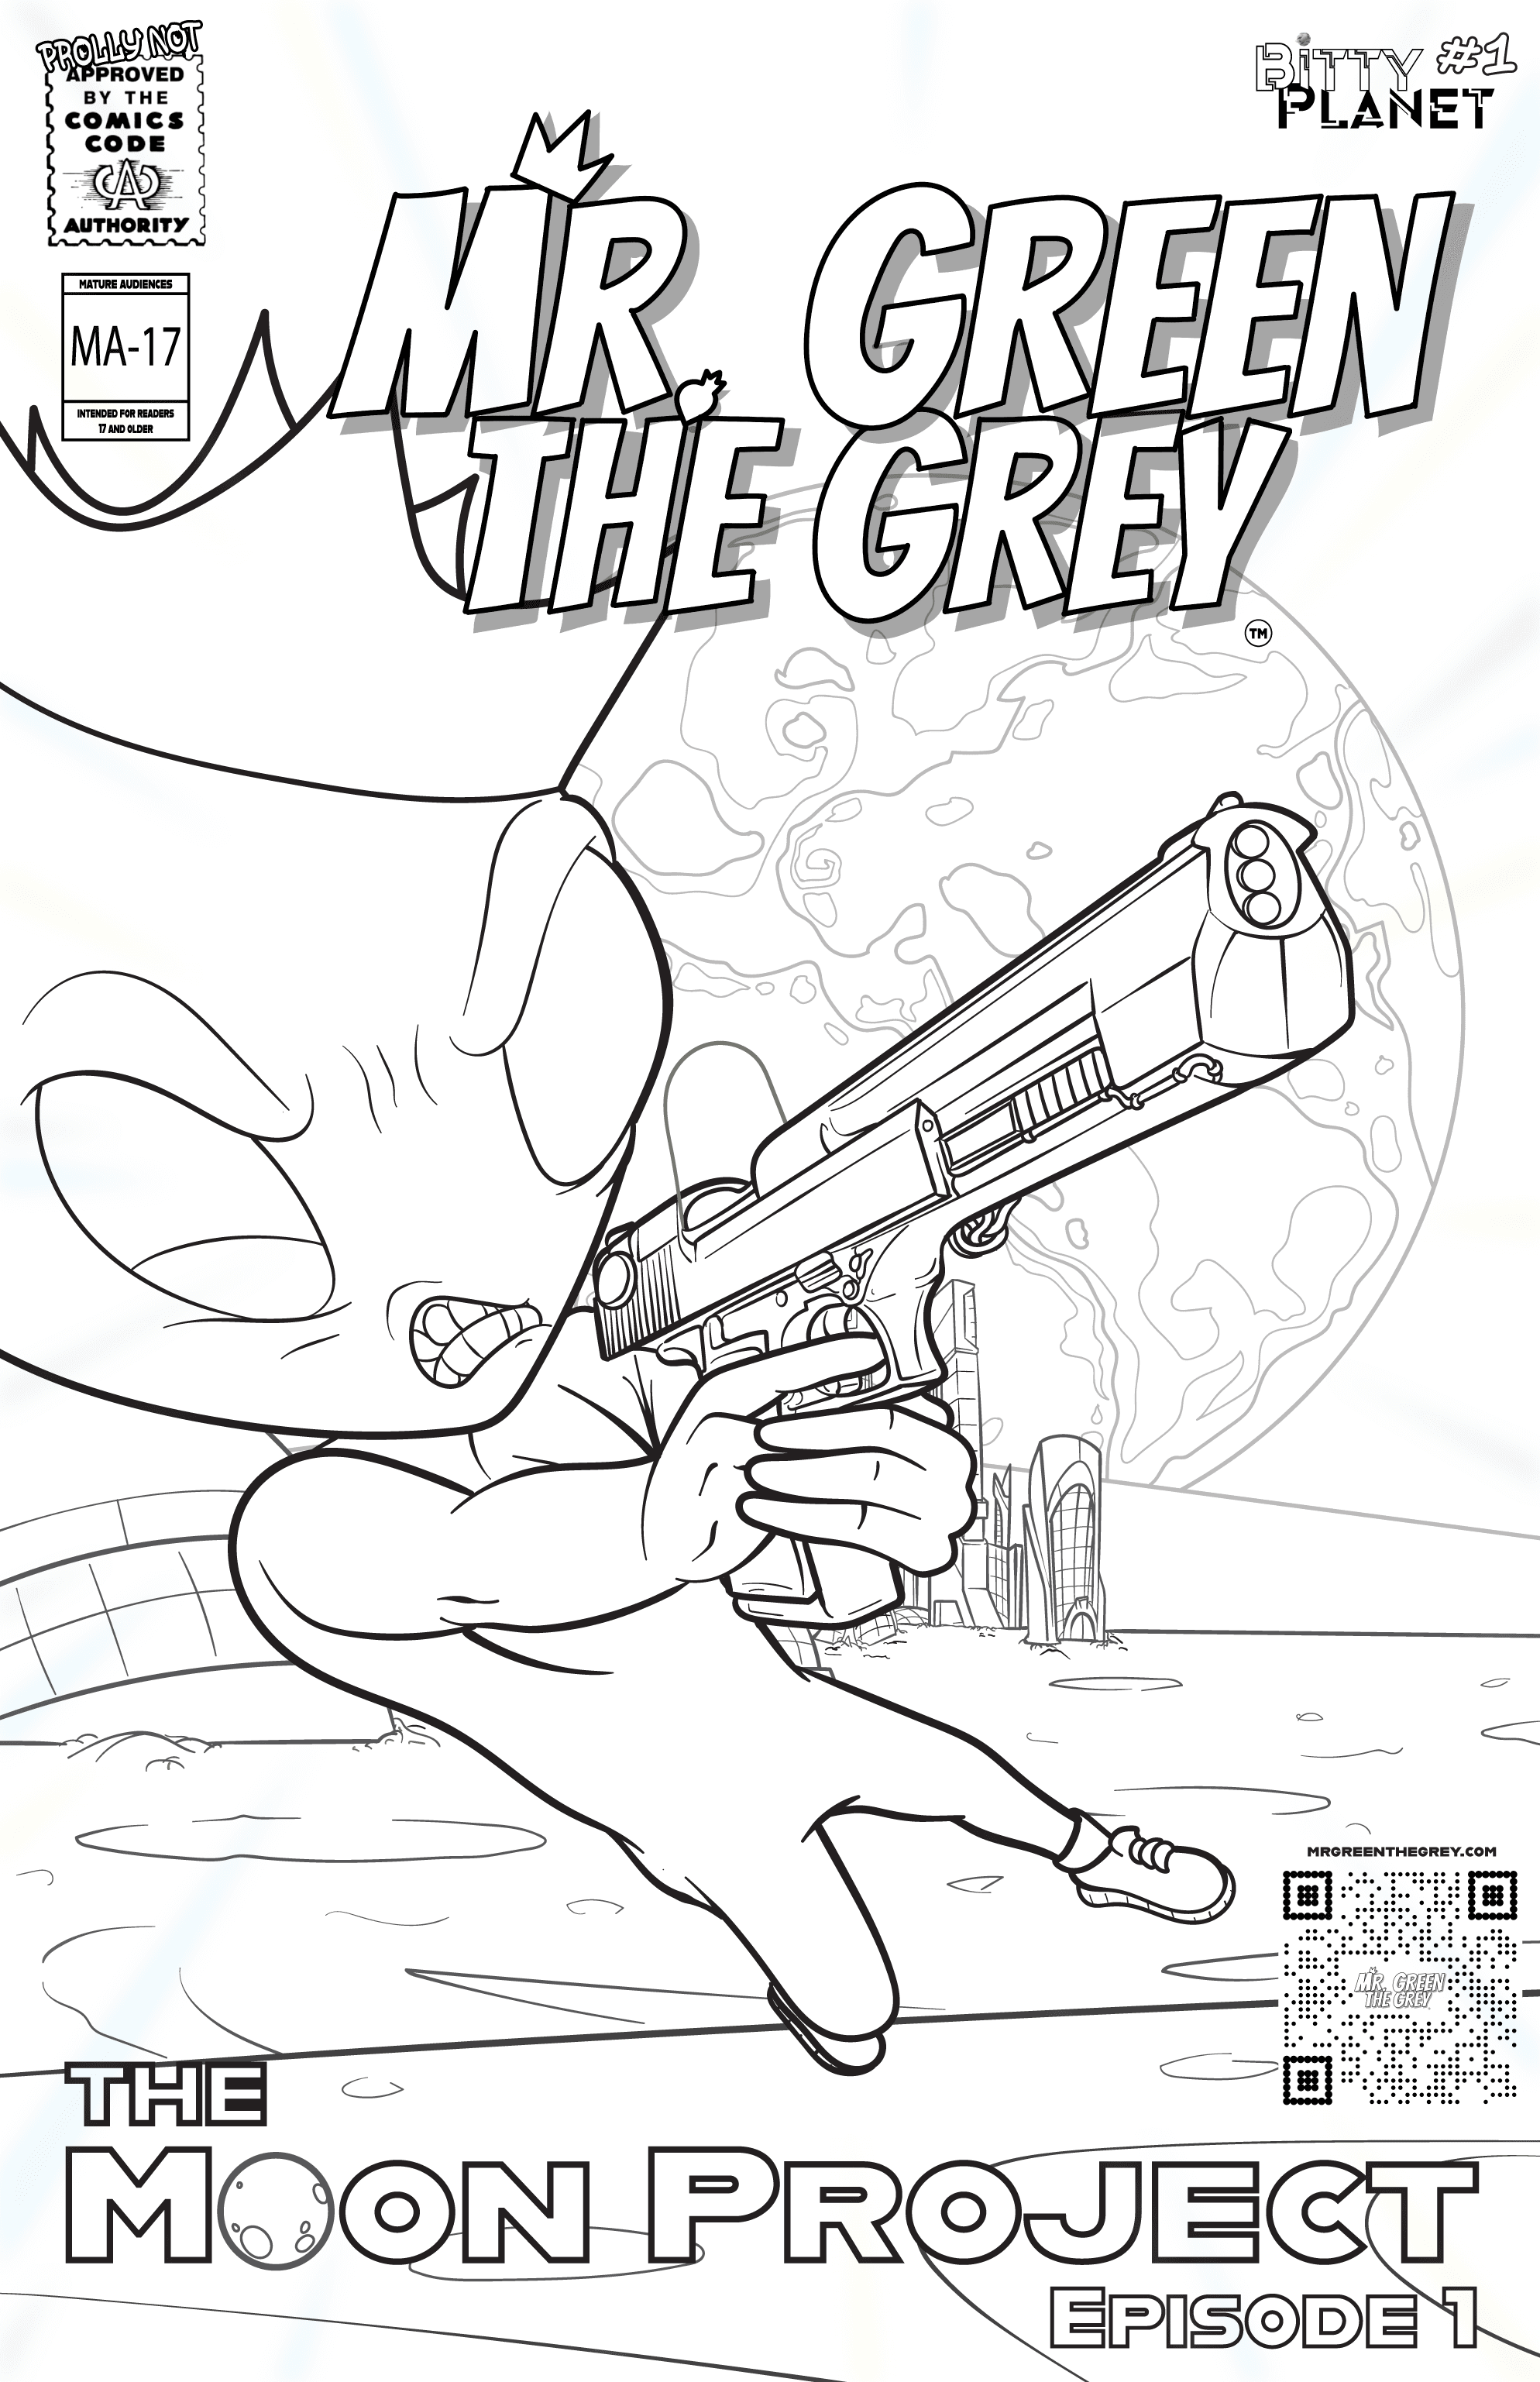 MGTG: The Moon Project - Ep. 1 (Line Art COVER)